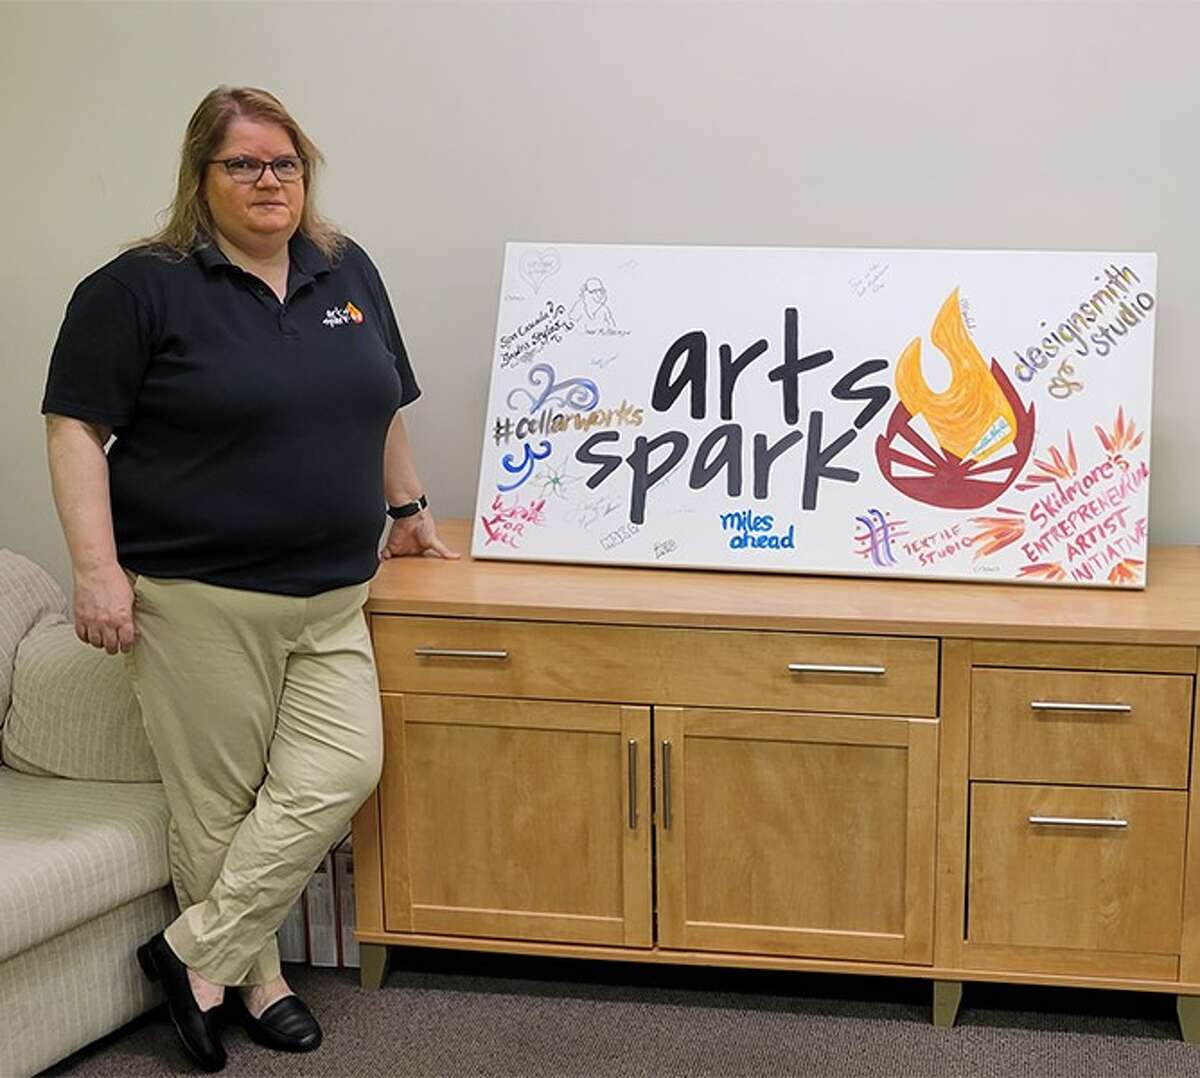  Beth Moeller, a founder of marketing company Arts-Spark.